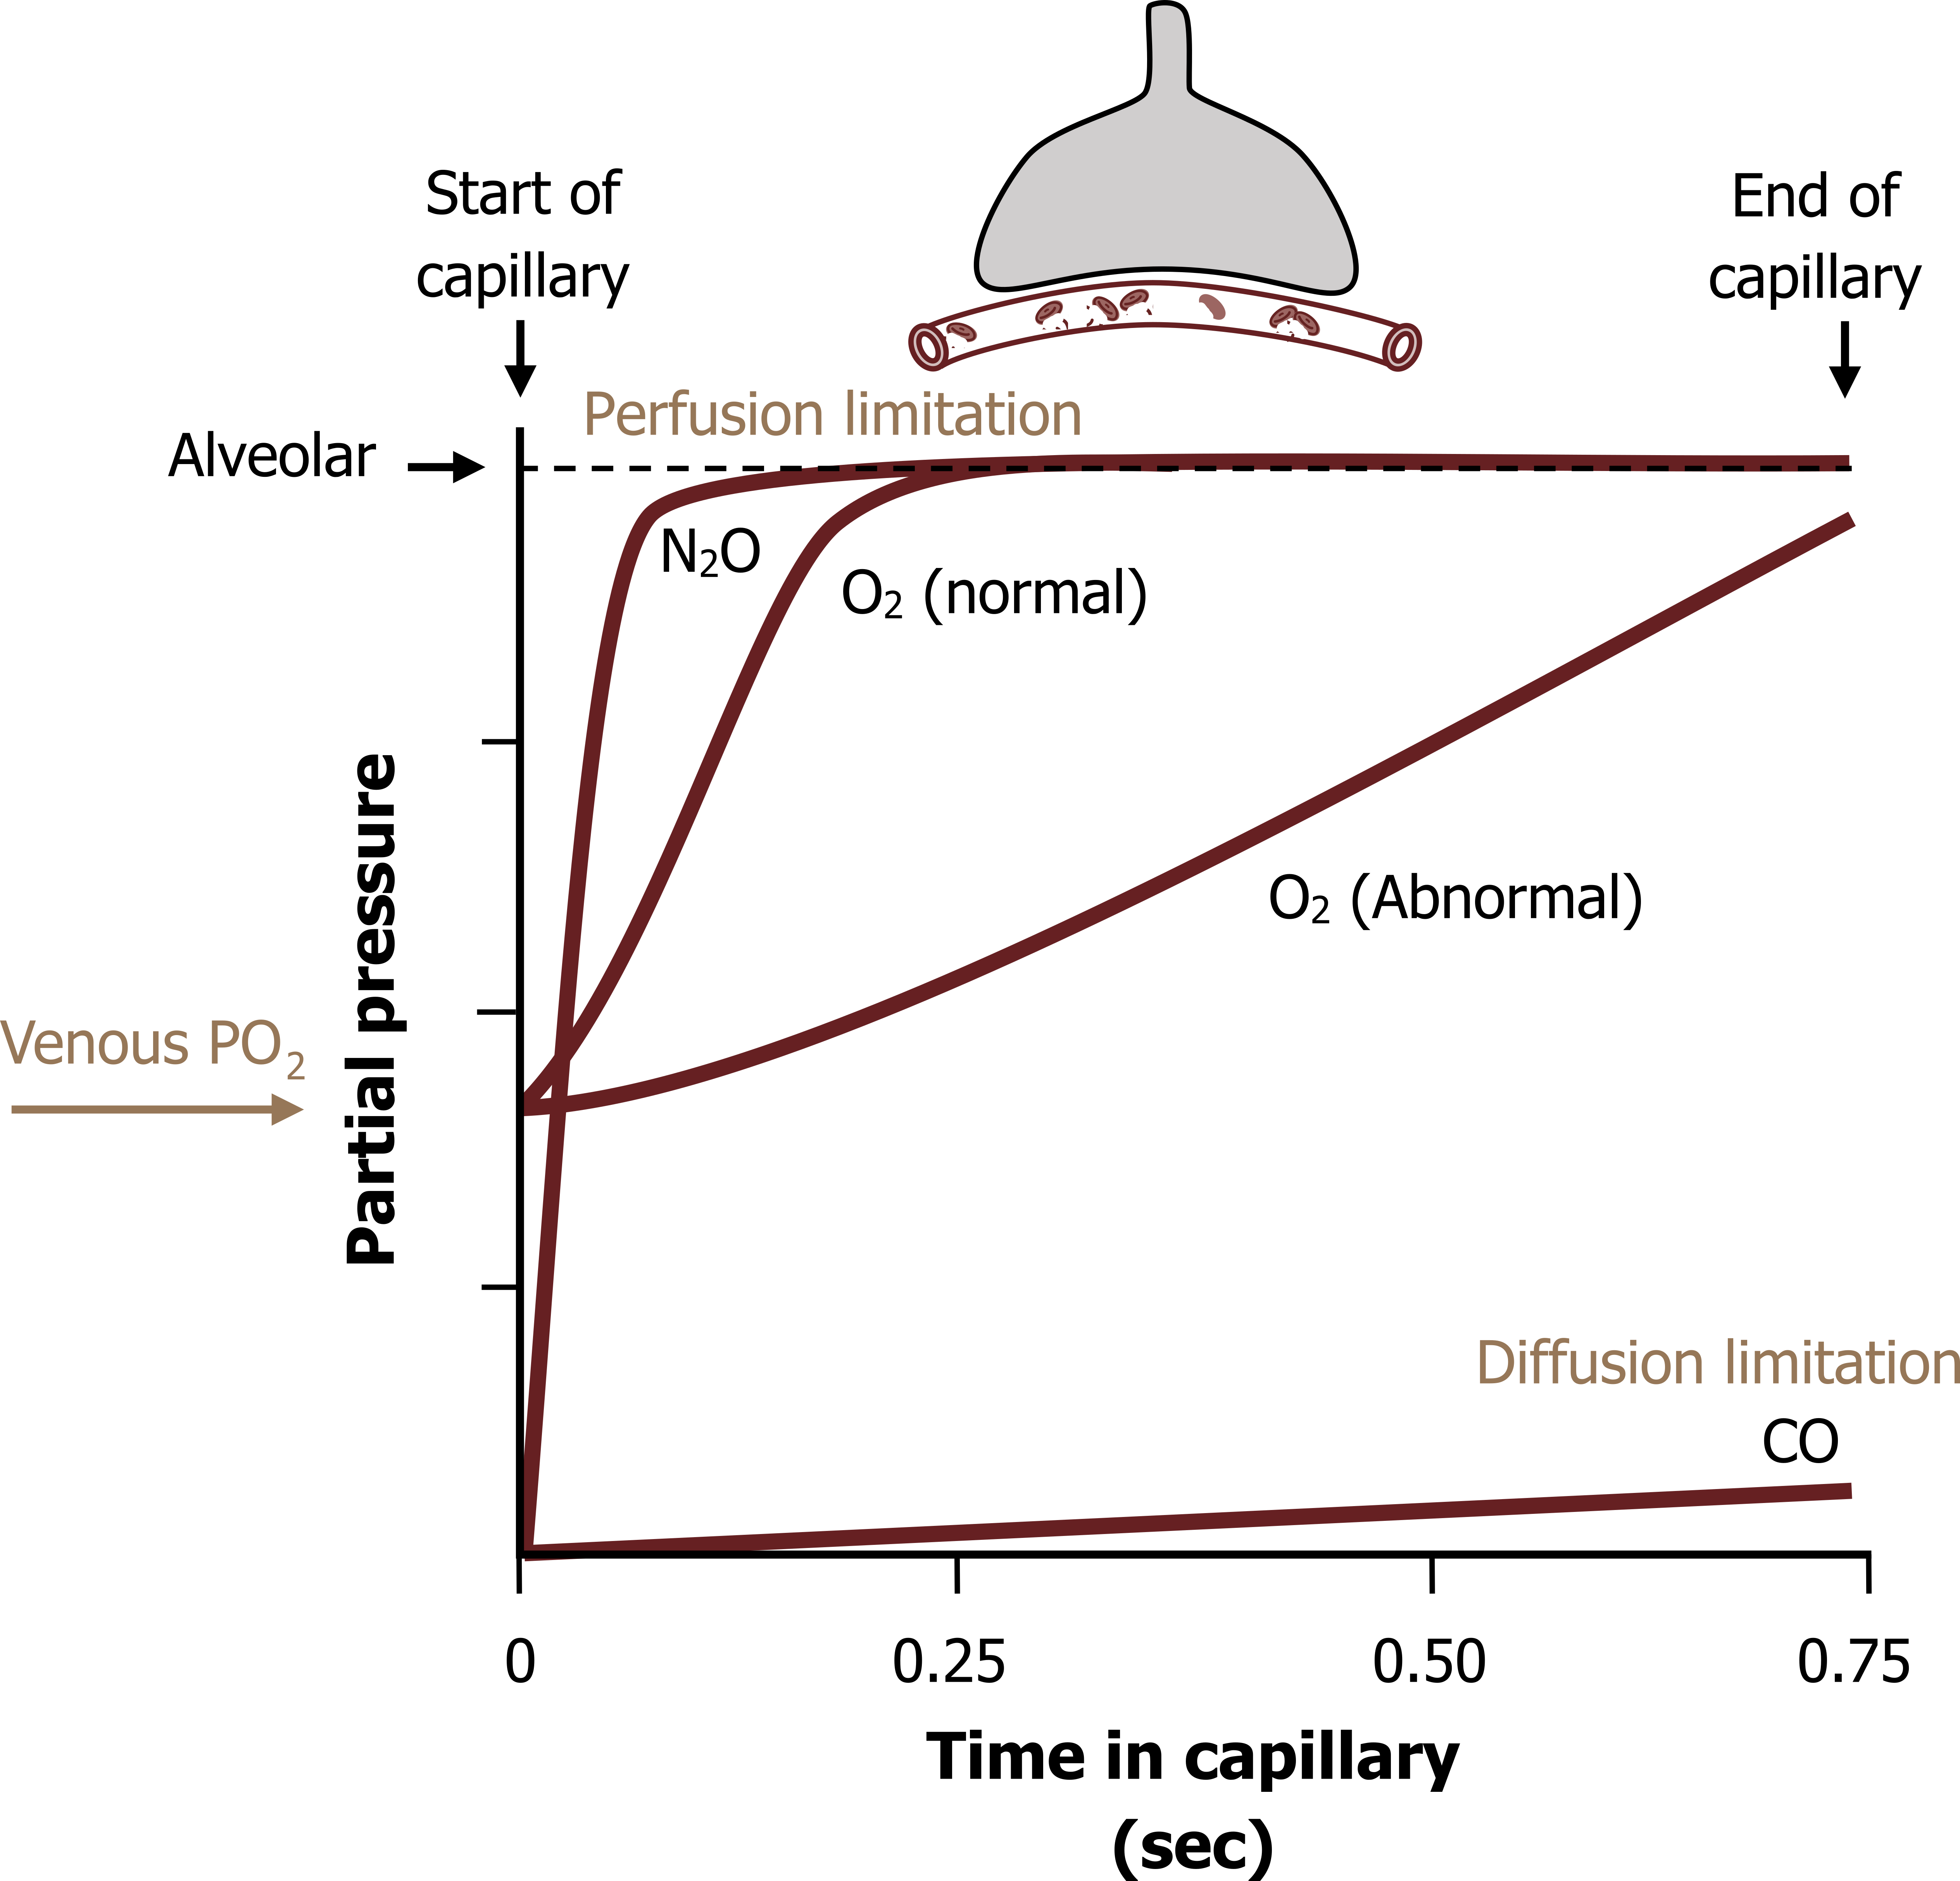 Graph with x-axis labeled time in capillary (sec) ranging from 0 to 0.75 and y-axis labeled partial pressure. A figure of an alveolus with a capillary running under it is above the graph with an arrow into the capillary labeled perfusion limitation. A dotted line at the top of the graph labeled perfusion limitation with a horizontal arrow with text alveolar, a vertical arrow with text start of capillary at the left, and a vertical arrow with text end of capillary at the right. CO: Straight line with slight positive direction. O2 (normal): Sigmoidal line shape beginning half way up the y-axis. O2 (abnormal): Positive line beginning half way up the y-axis. Arrow with text labeled venous PO2 points to the beginning of both O2 graphs. N2O: Near vertical line beginning from 0 and flattening out at the perfusion limitation. All values are approximate.